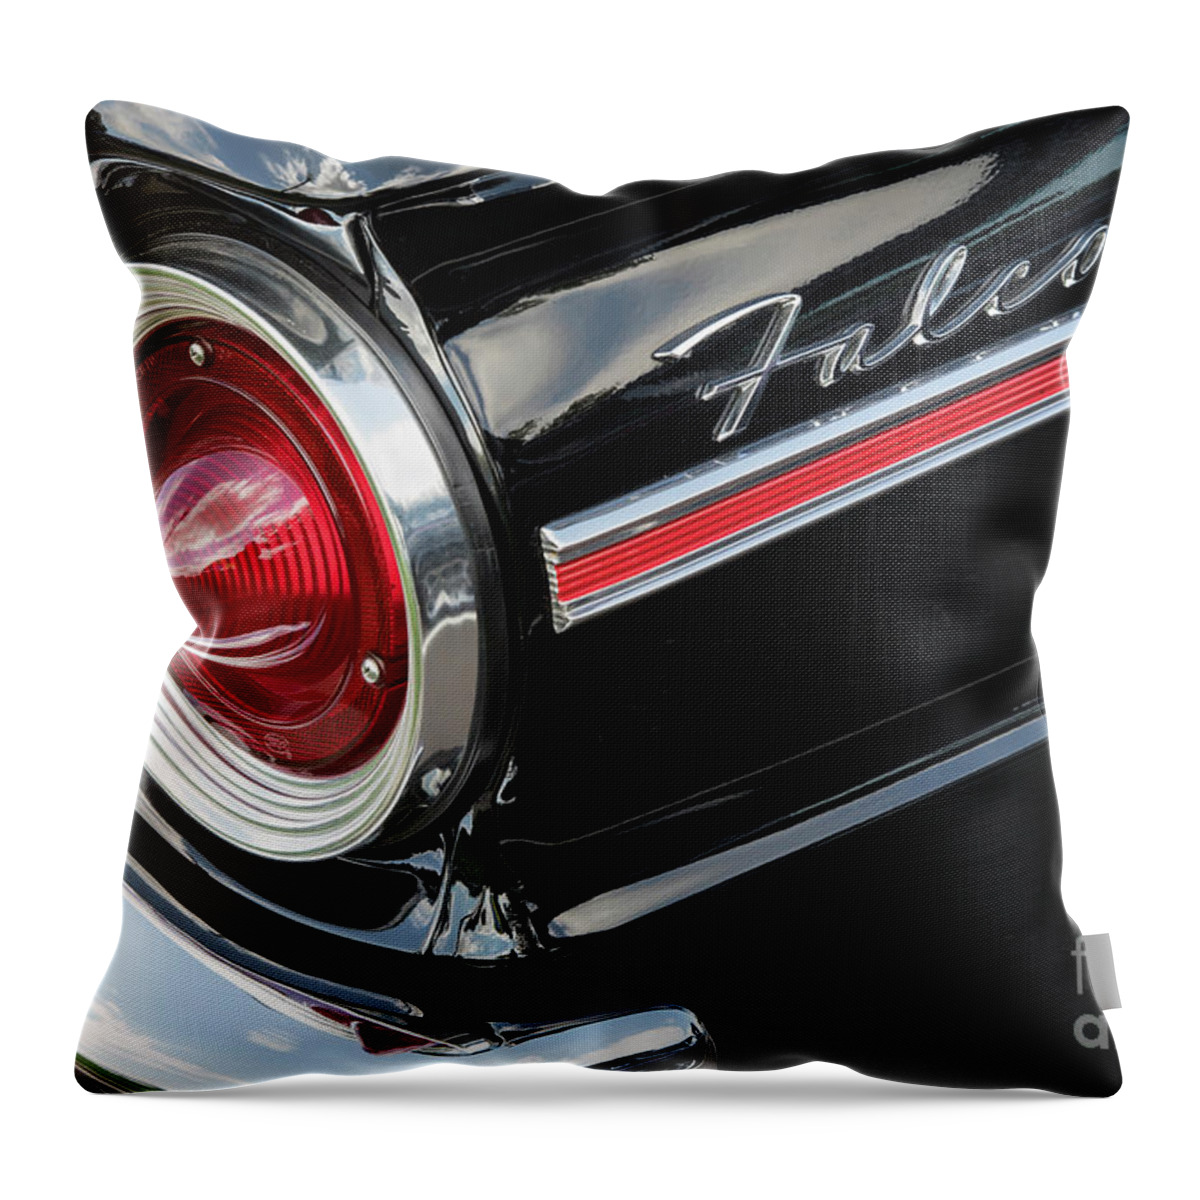 Ford Throw Pillow featuring the photograph 1963 Falcon Taillight by Dennis Hedberg